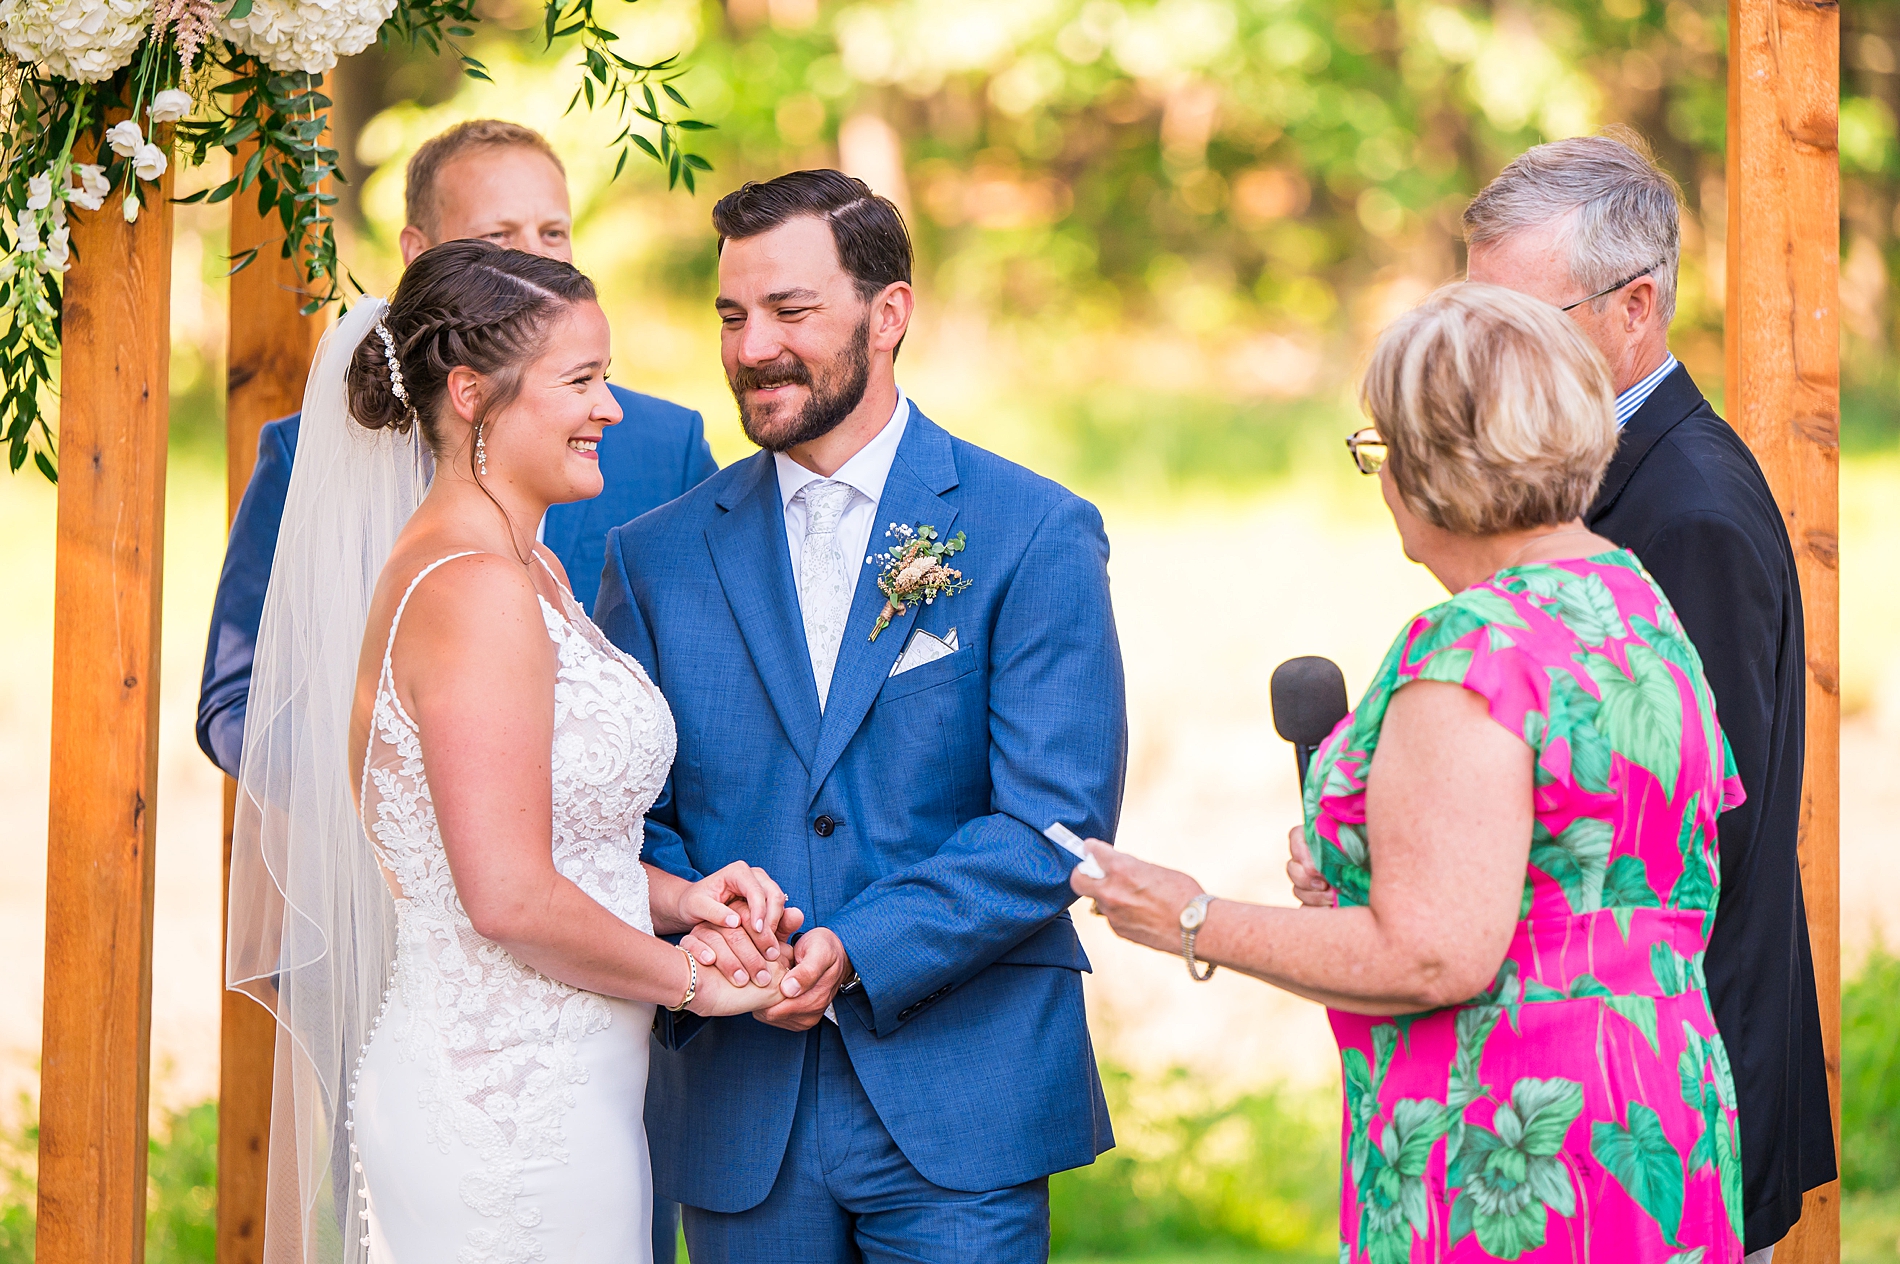 marriage ceremony from Timeless Sunset Beach Wedding in Kennebunkport, ME